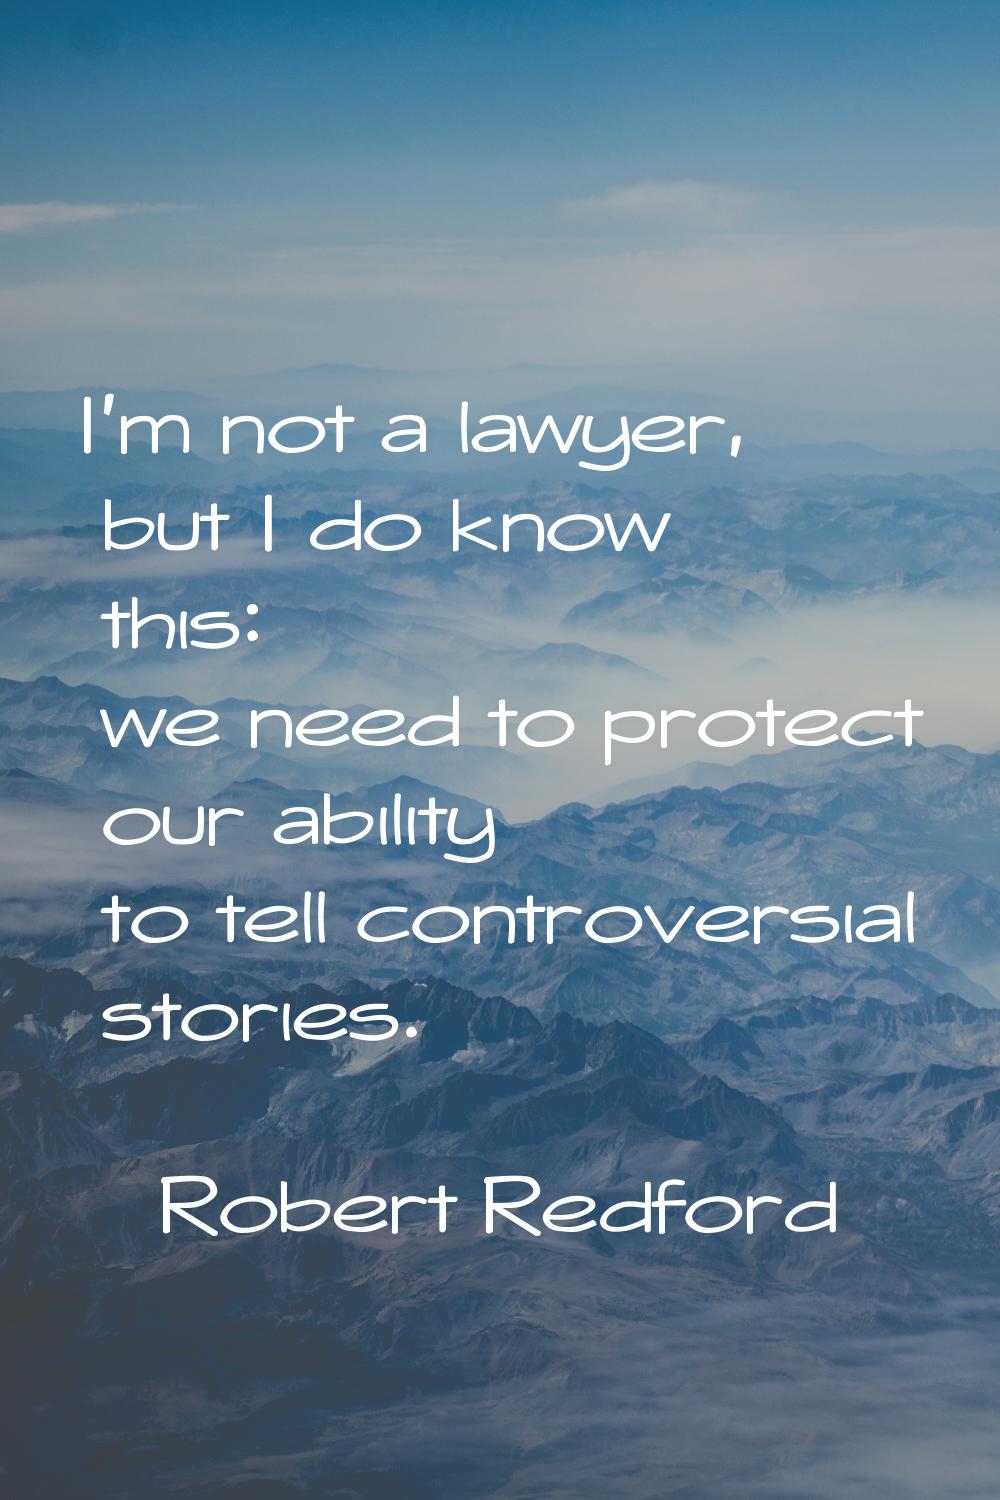 I'm not a lawyer, but I do know this: we need to protect our ability to tell controversial stories.